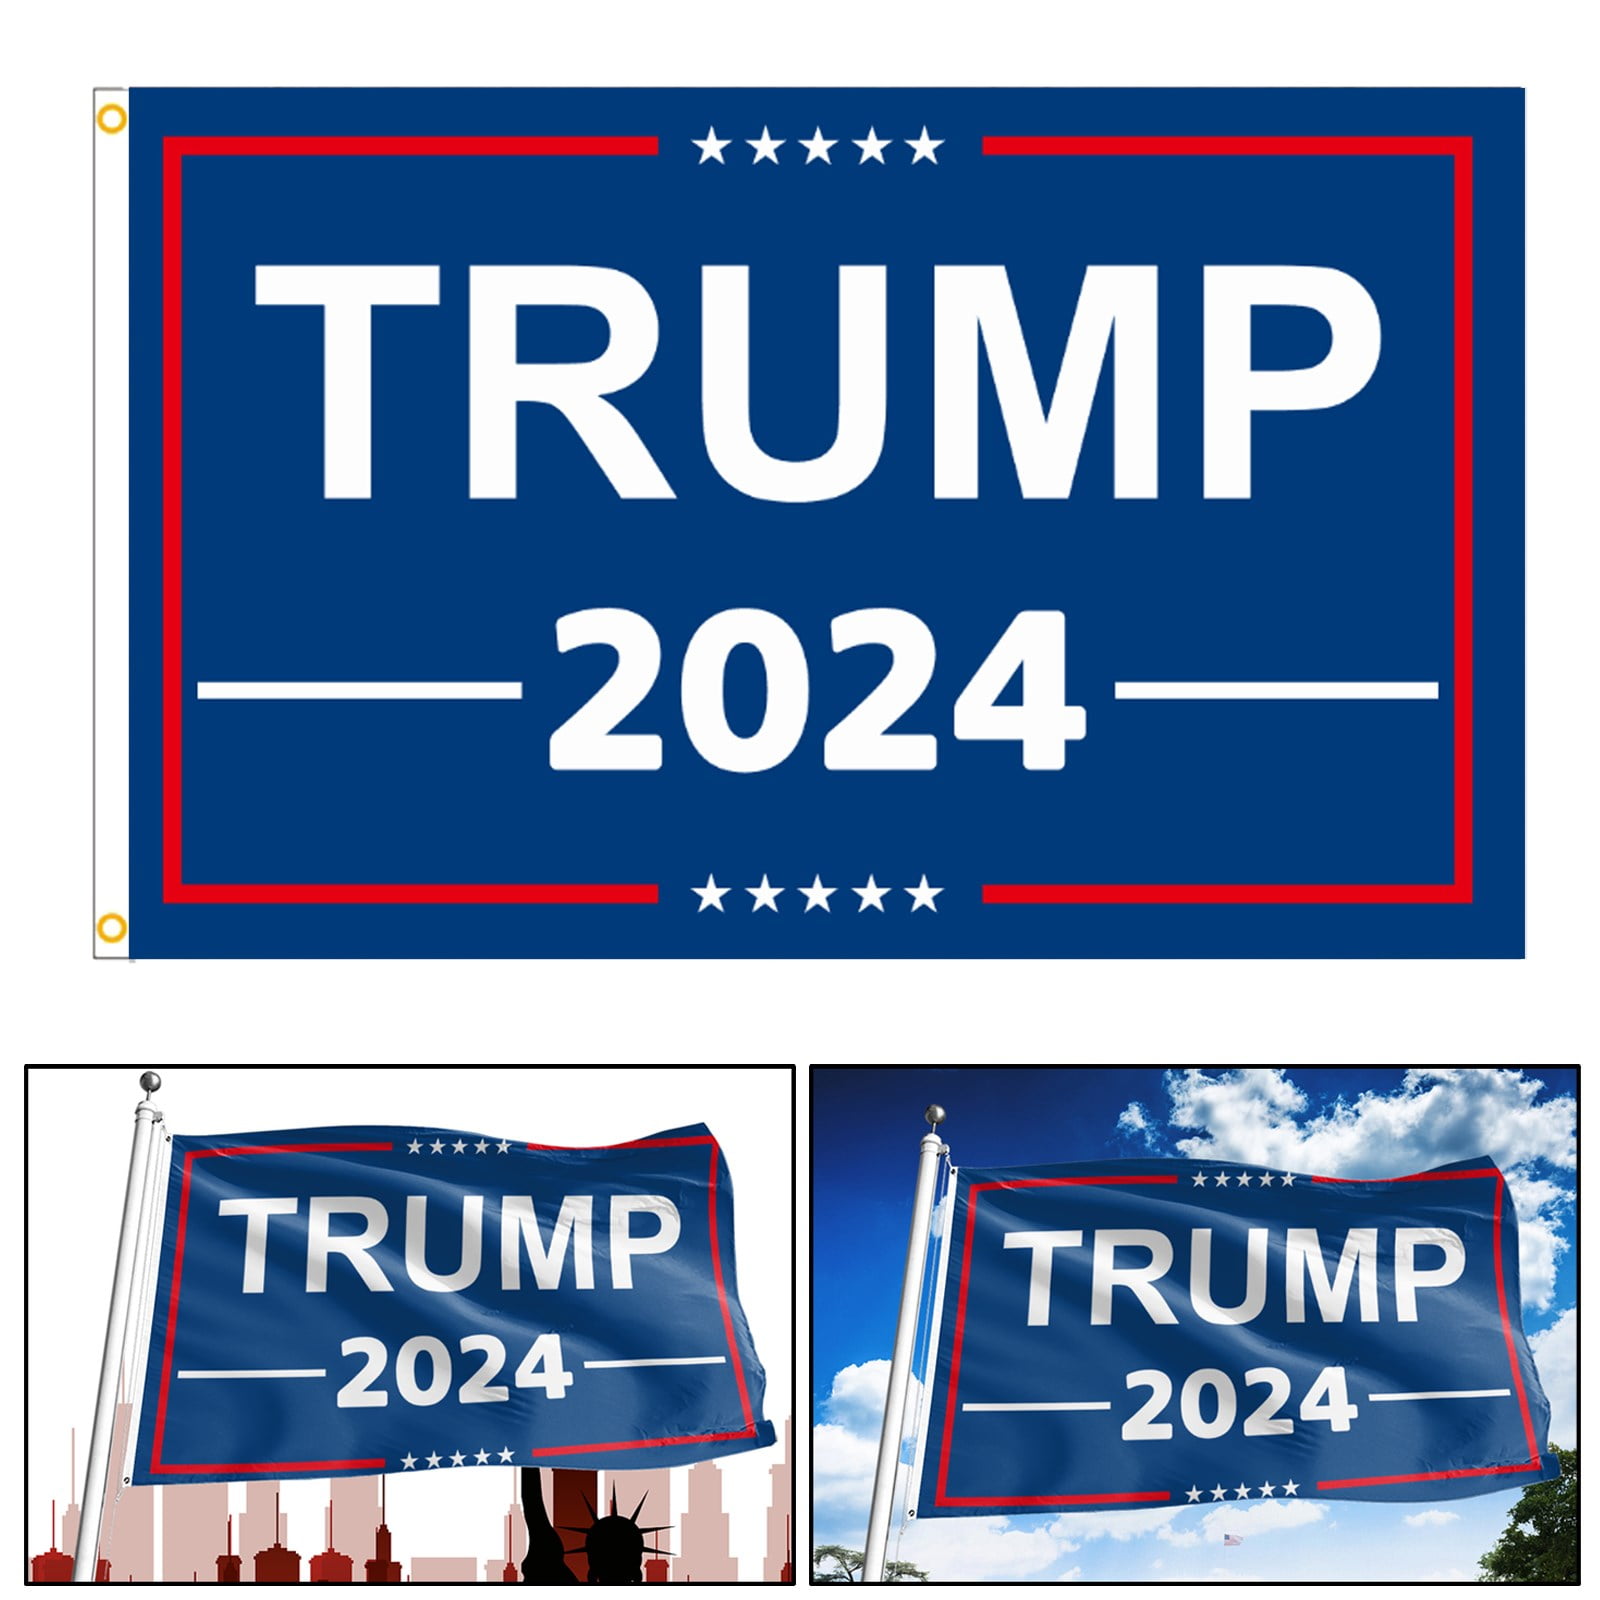 Details about   Trump 2024 Flag 3x5" Banner Donald Trump President ，Fast shipping 